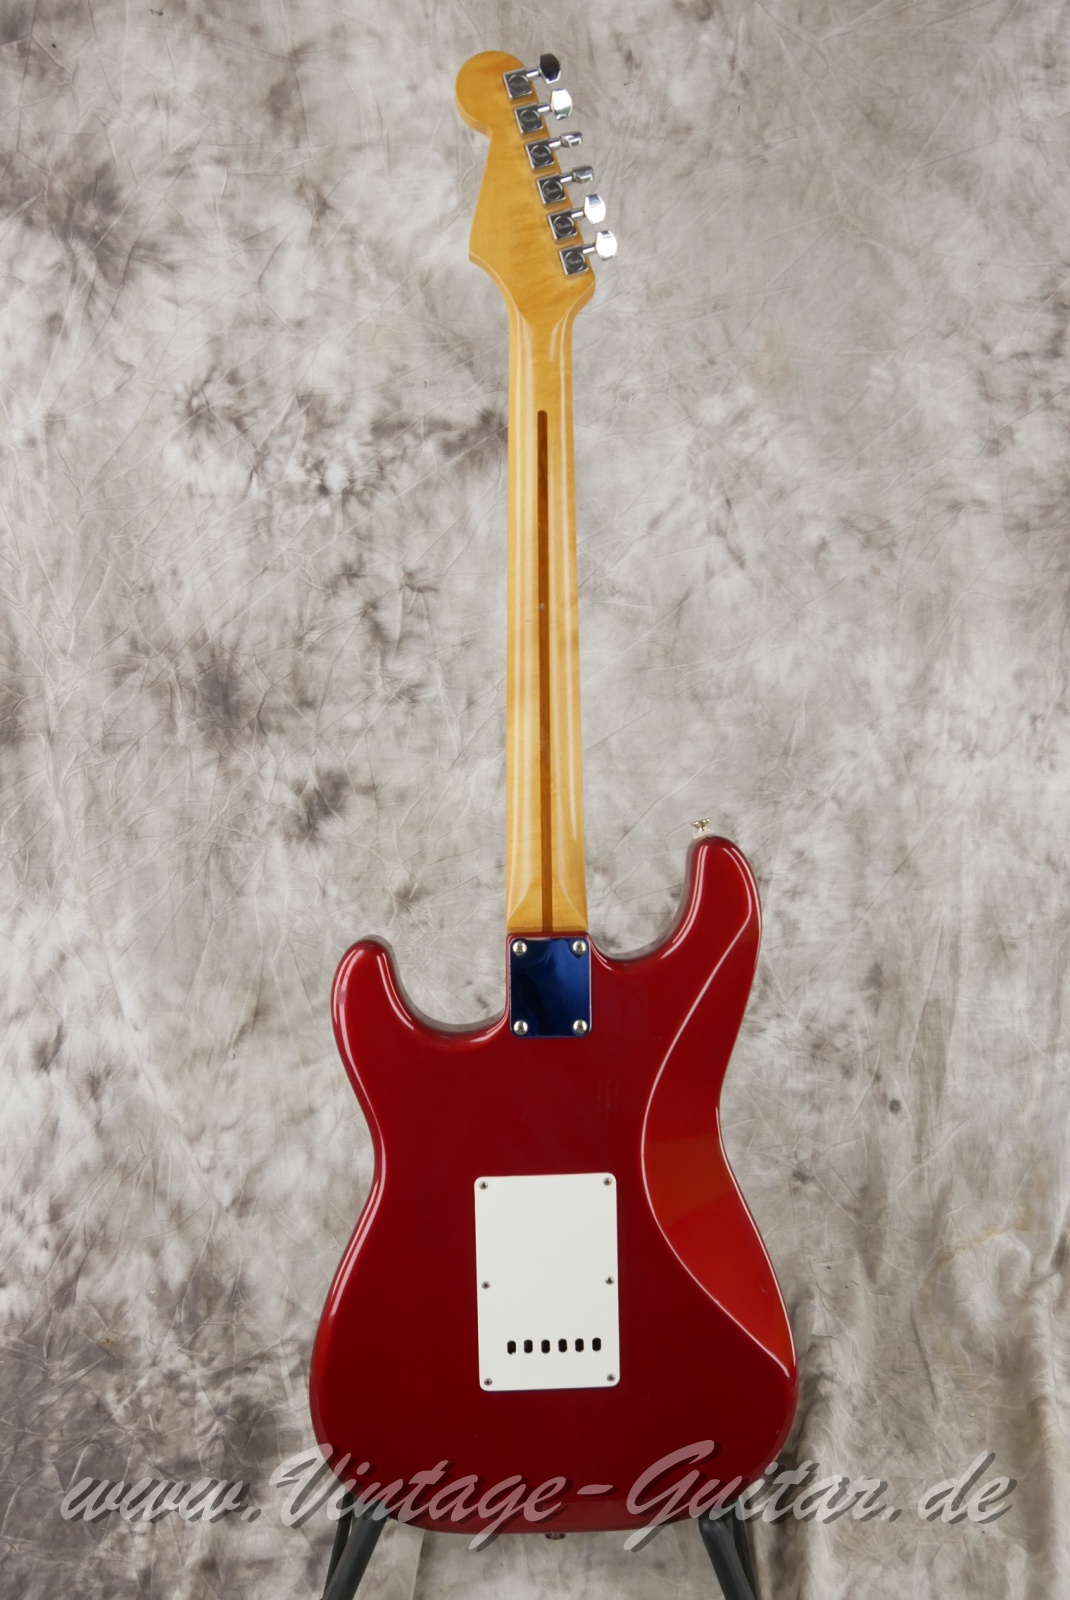 Fender_Stratocaster_Mexico_candy_apple_red_1991-002.JPG